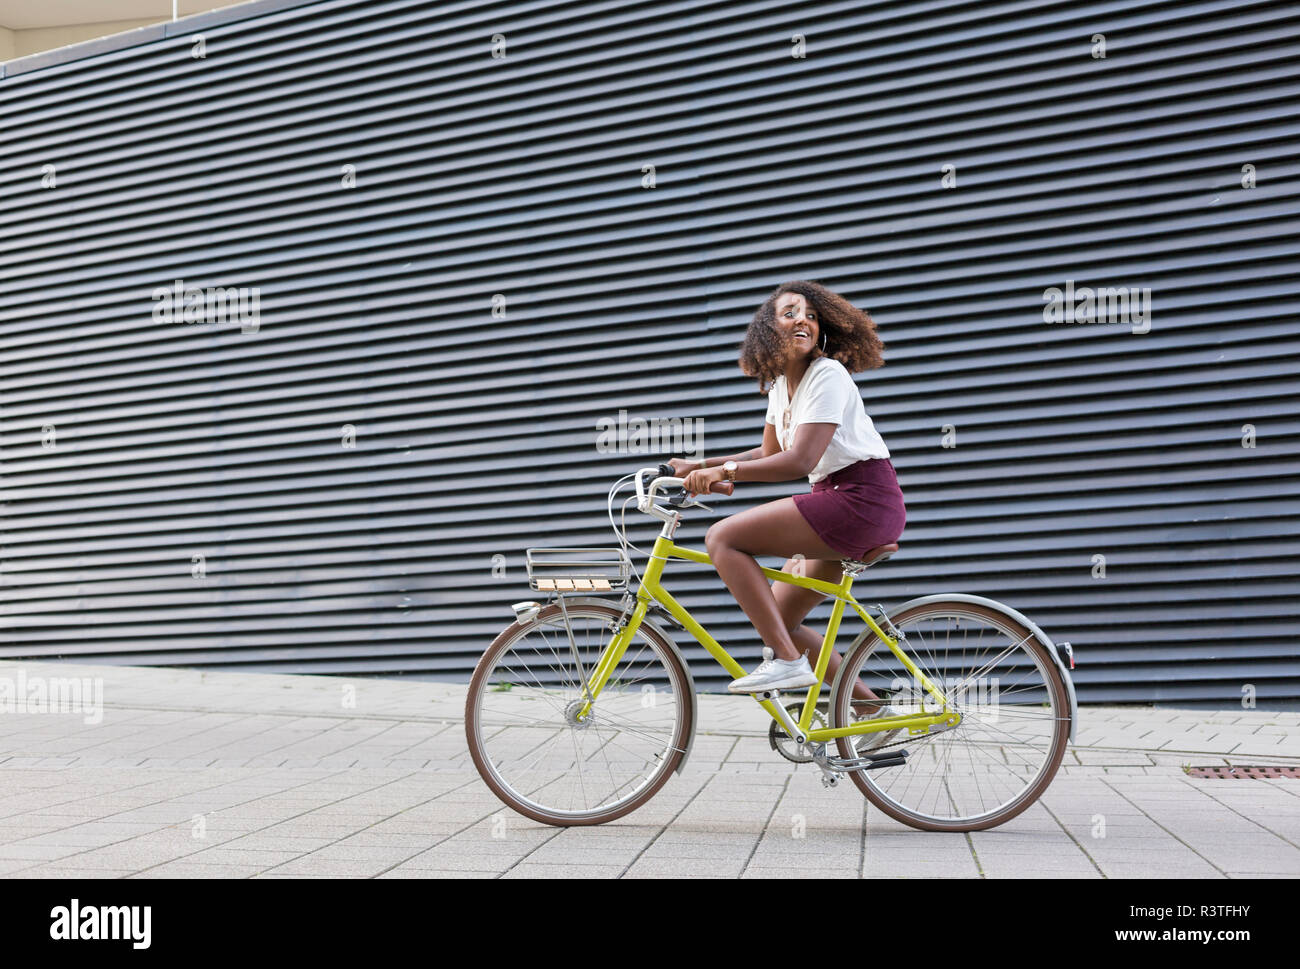 Smiling young woman riding bicycle Banque D'Images